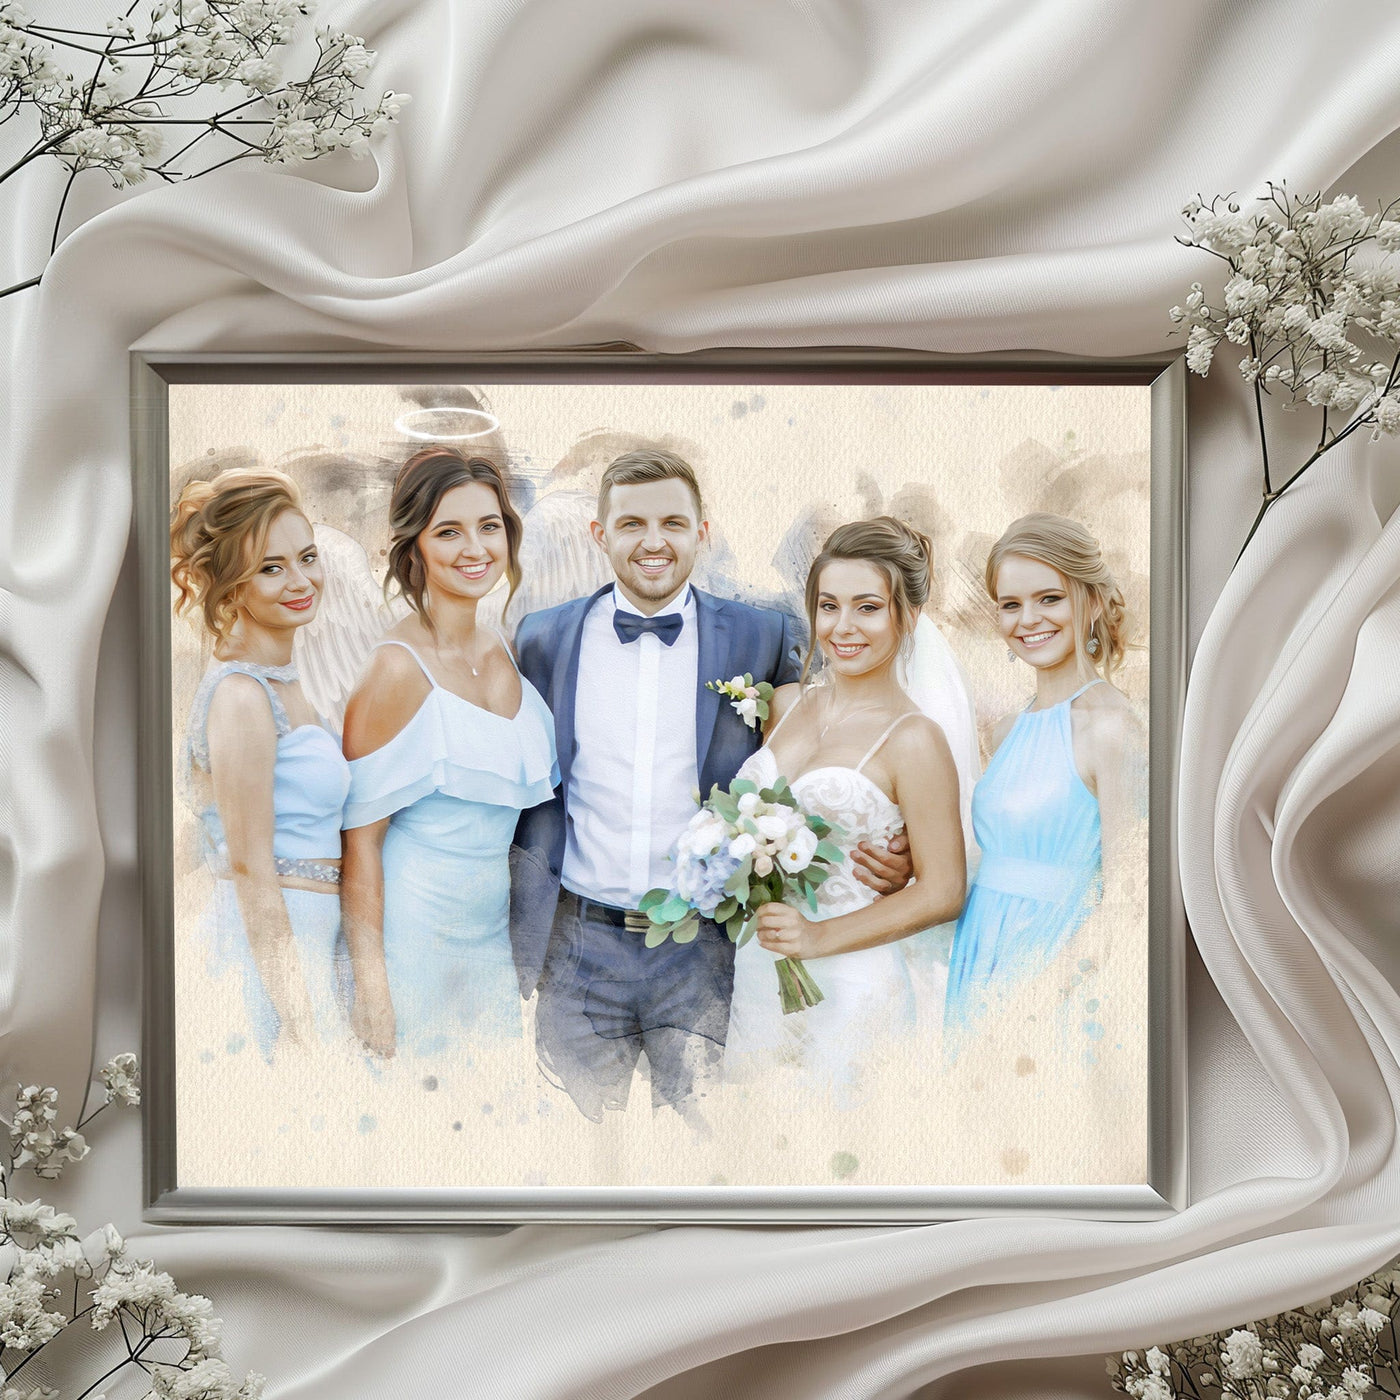 wedding photo restoration of lovely couple along with their friends